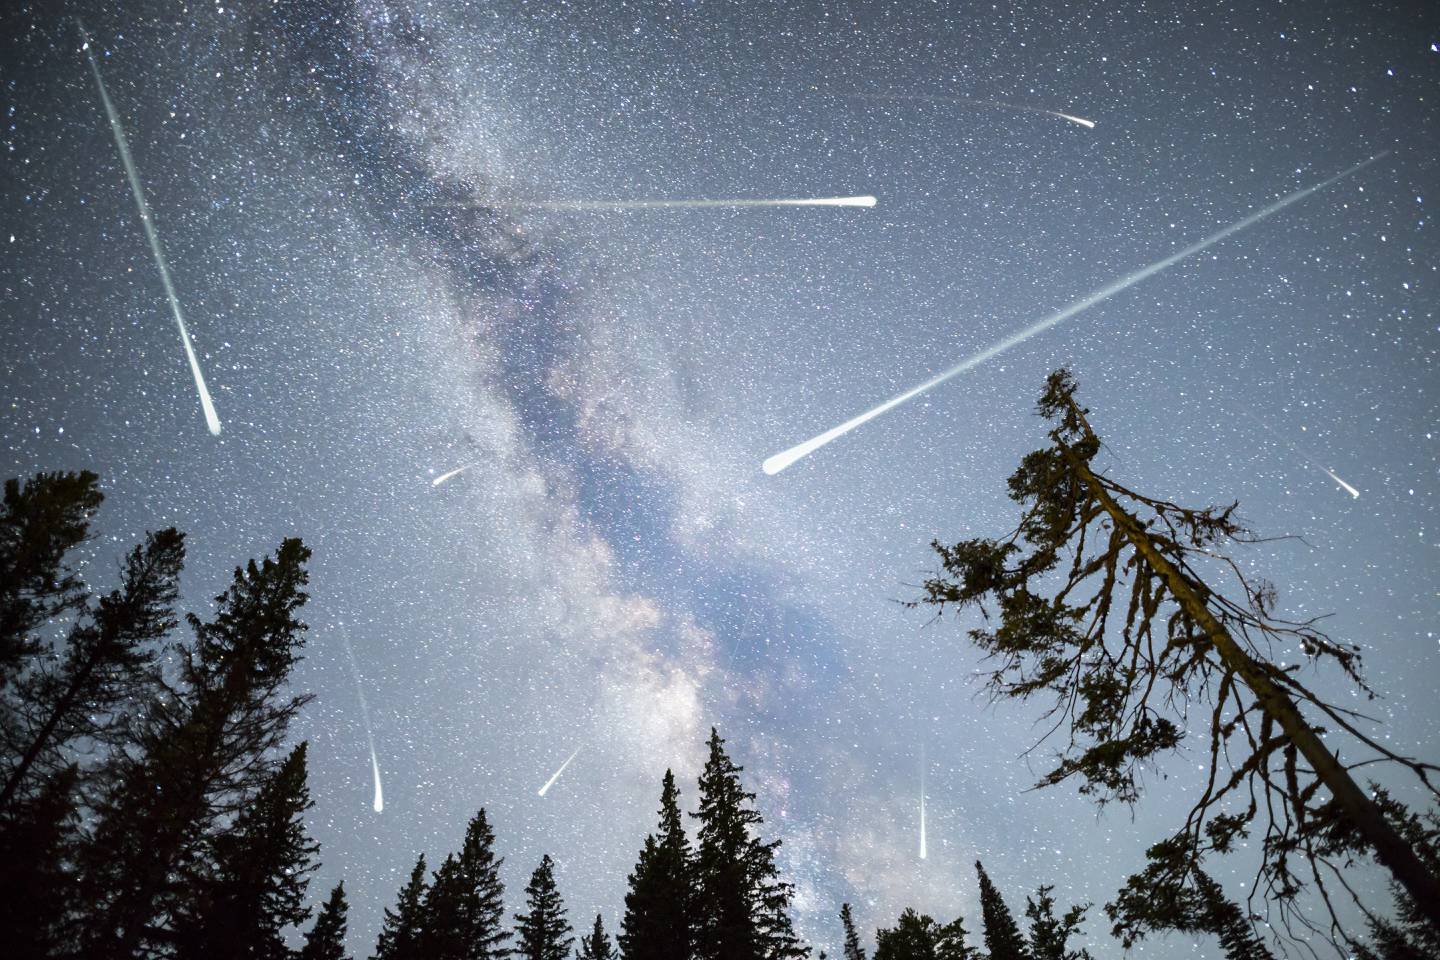 Between The Night Of Next Tuesday, December 13 And The Early Hours Of Wednesday, You And Your Whole Family Can Enjoy The Strongest Of The Best Meteor Showers Of 2023